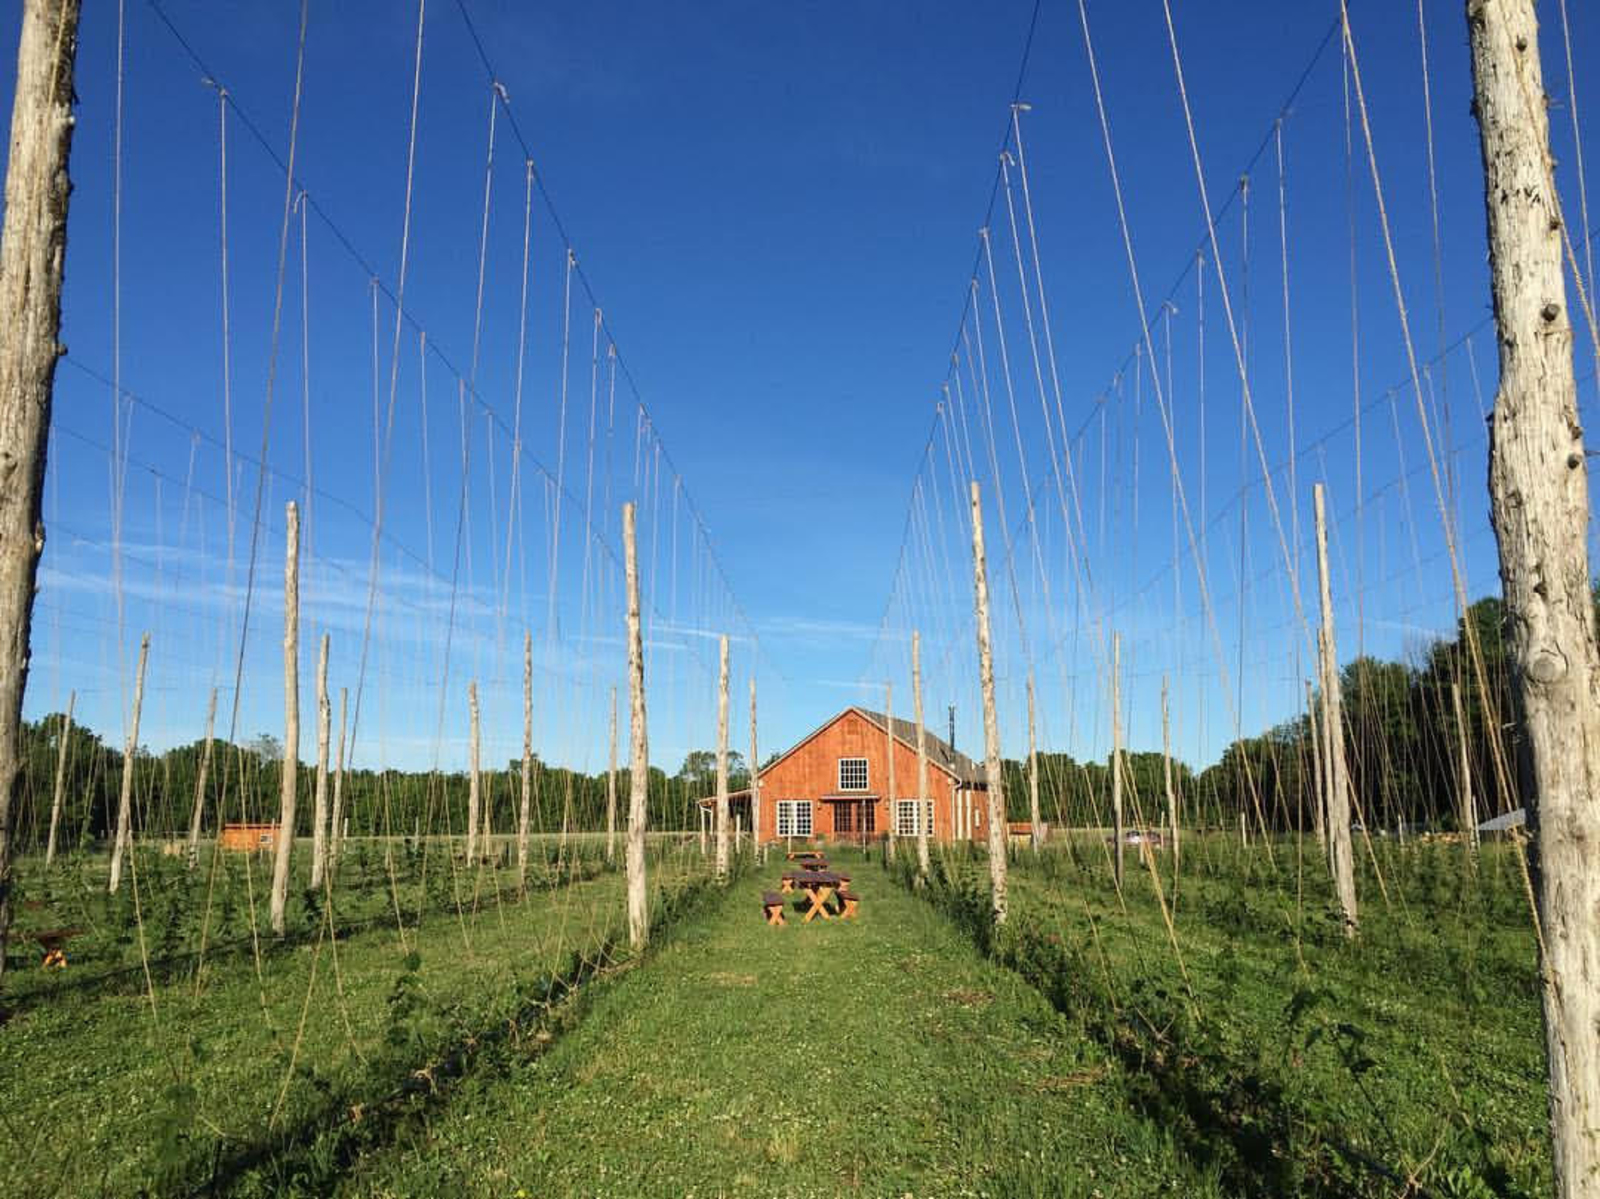 Local Adventures in the Hudson Valley: Arrowood Farm Brewery